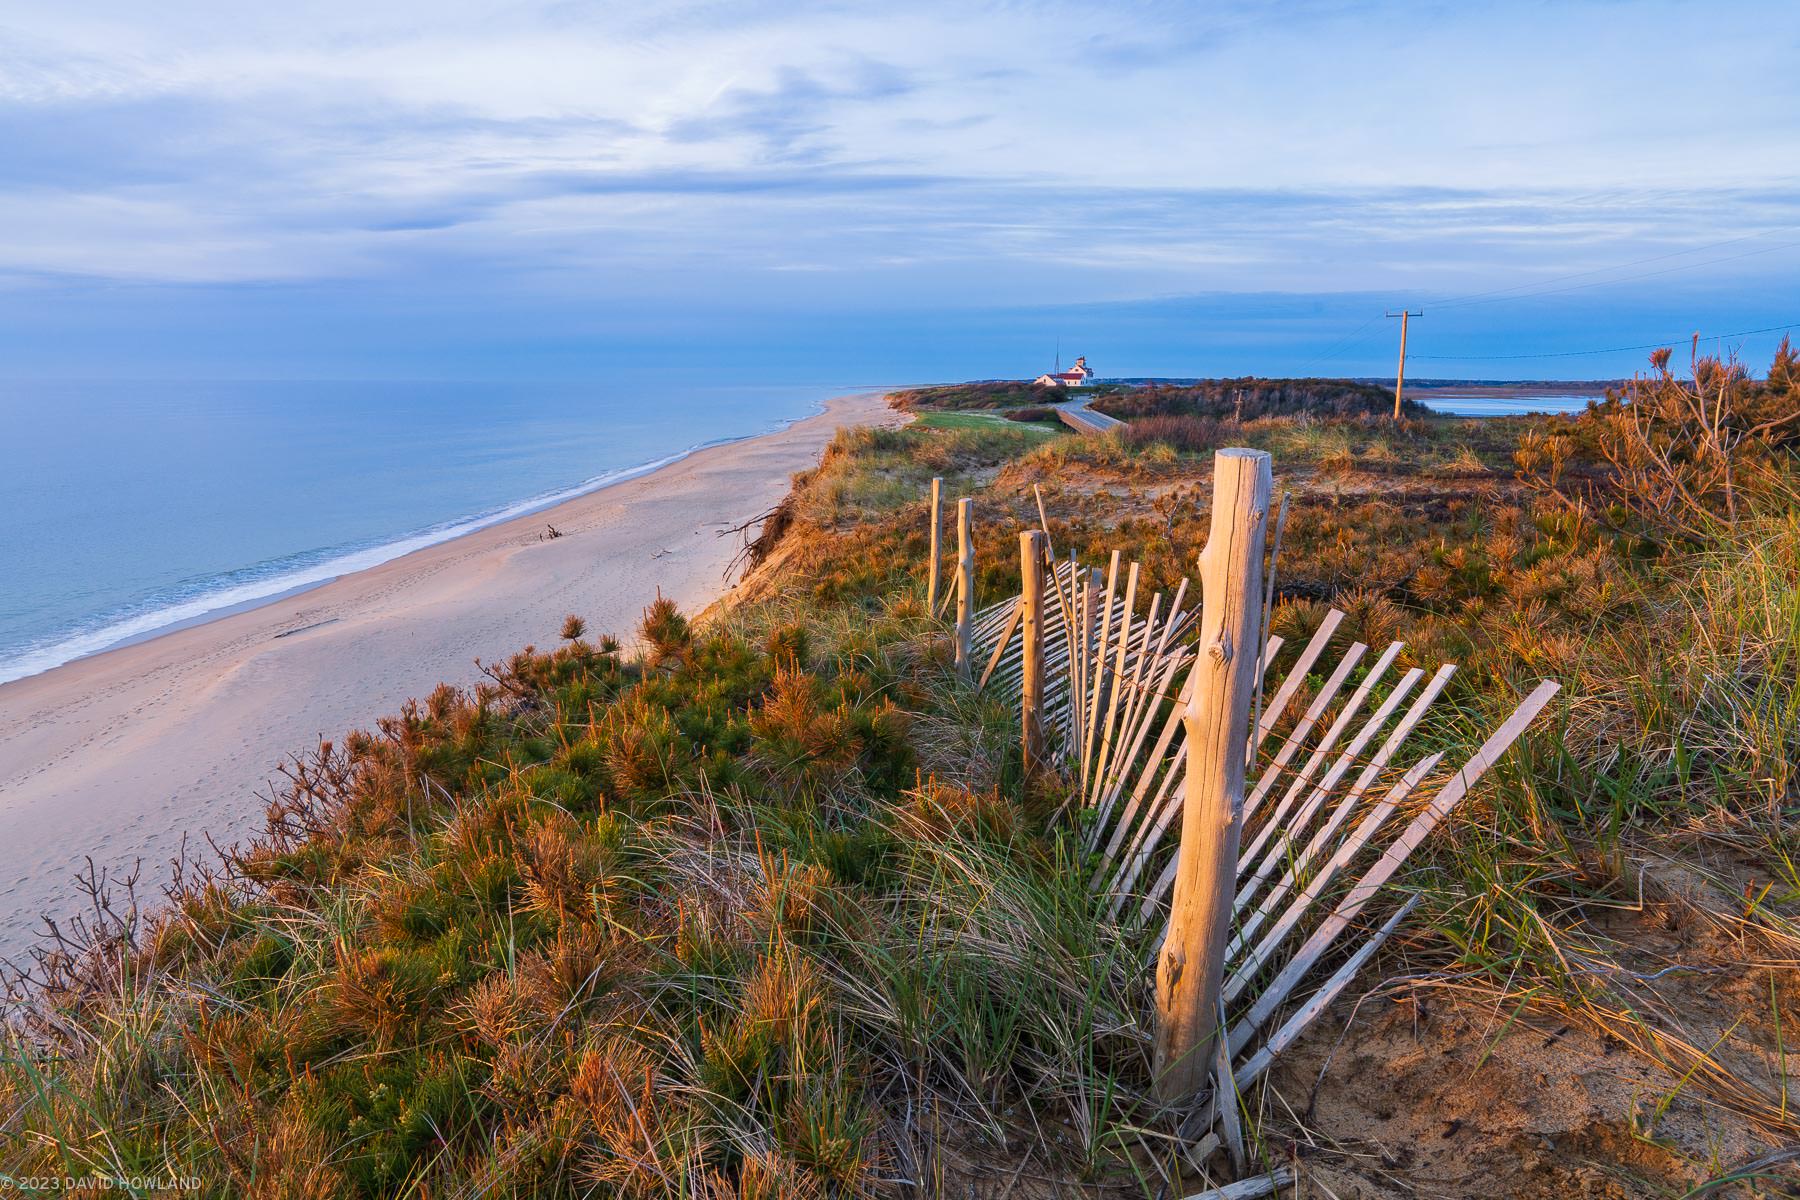 A photo of a twisted and worn wooden beach fence in the sand dunes of Coast Guard Beach in the Cape Cod National Seashore